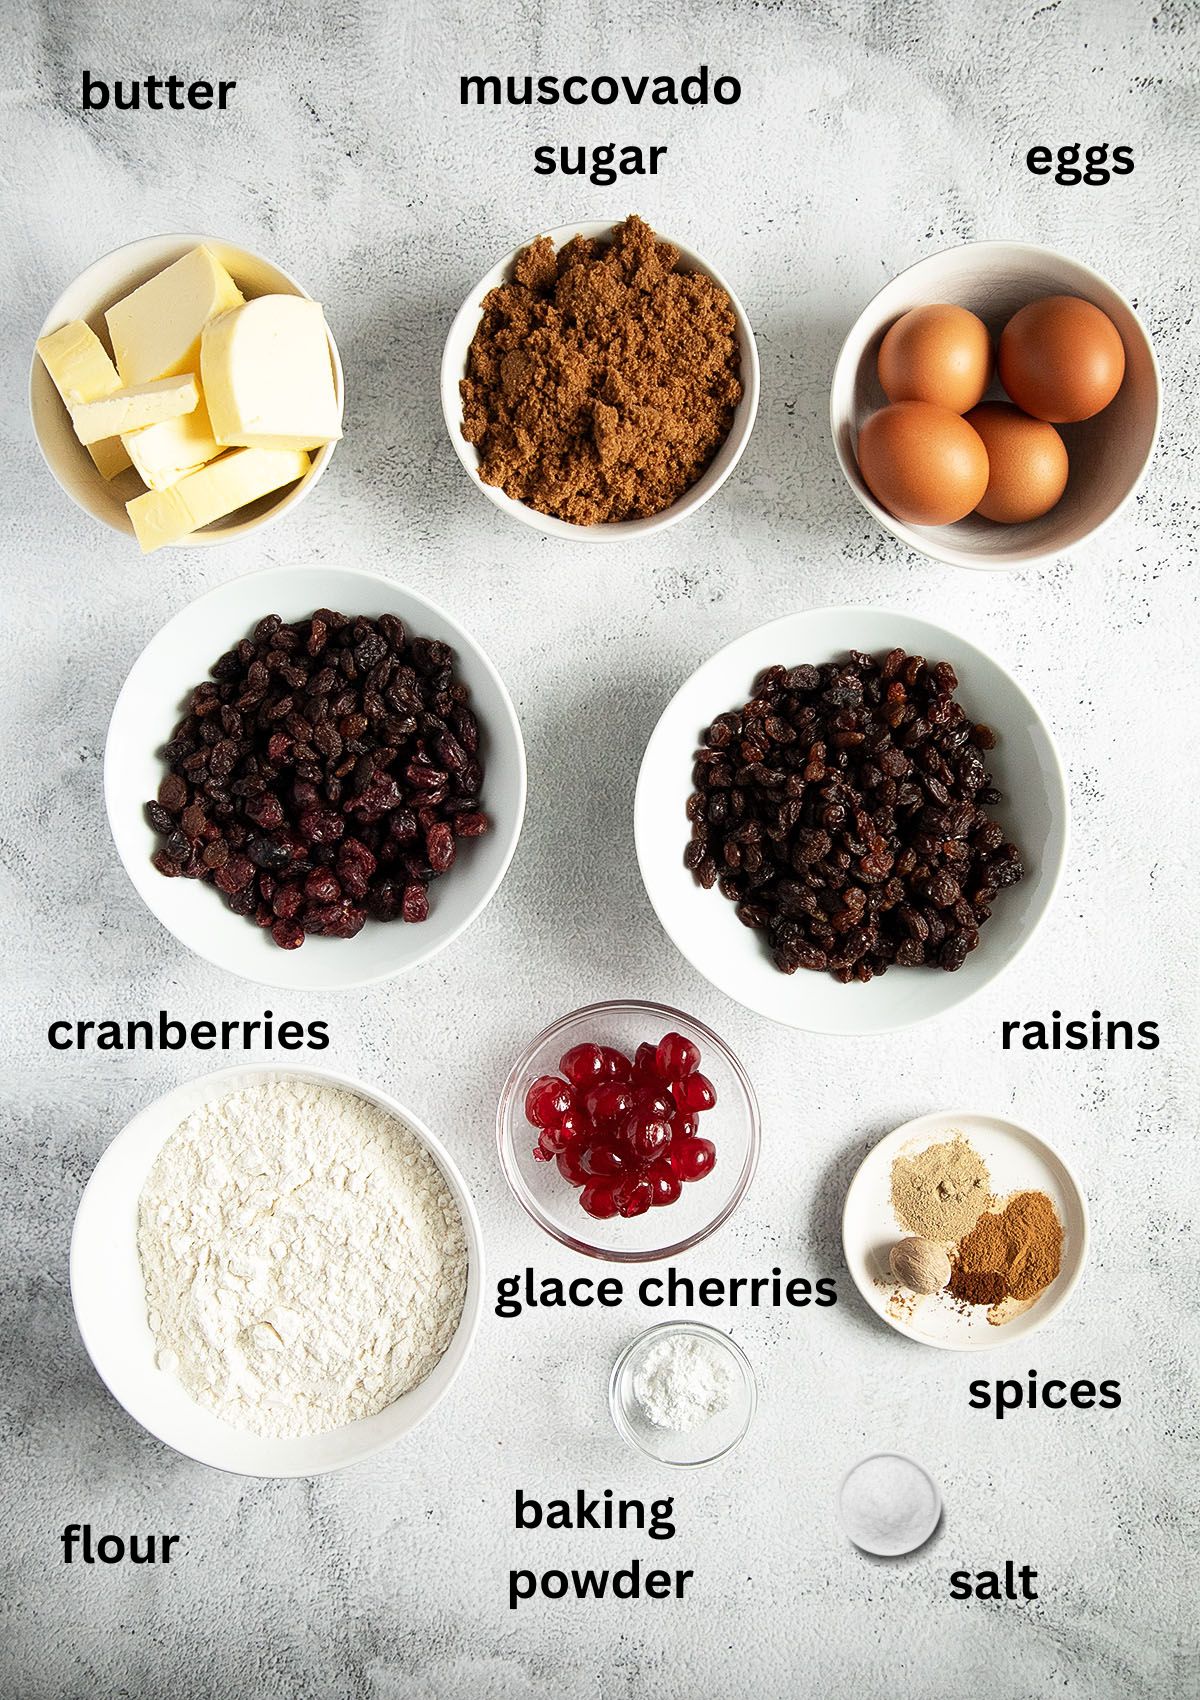 ingredients for making fruit cake without alcohol.